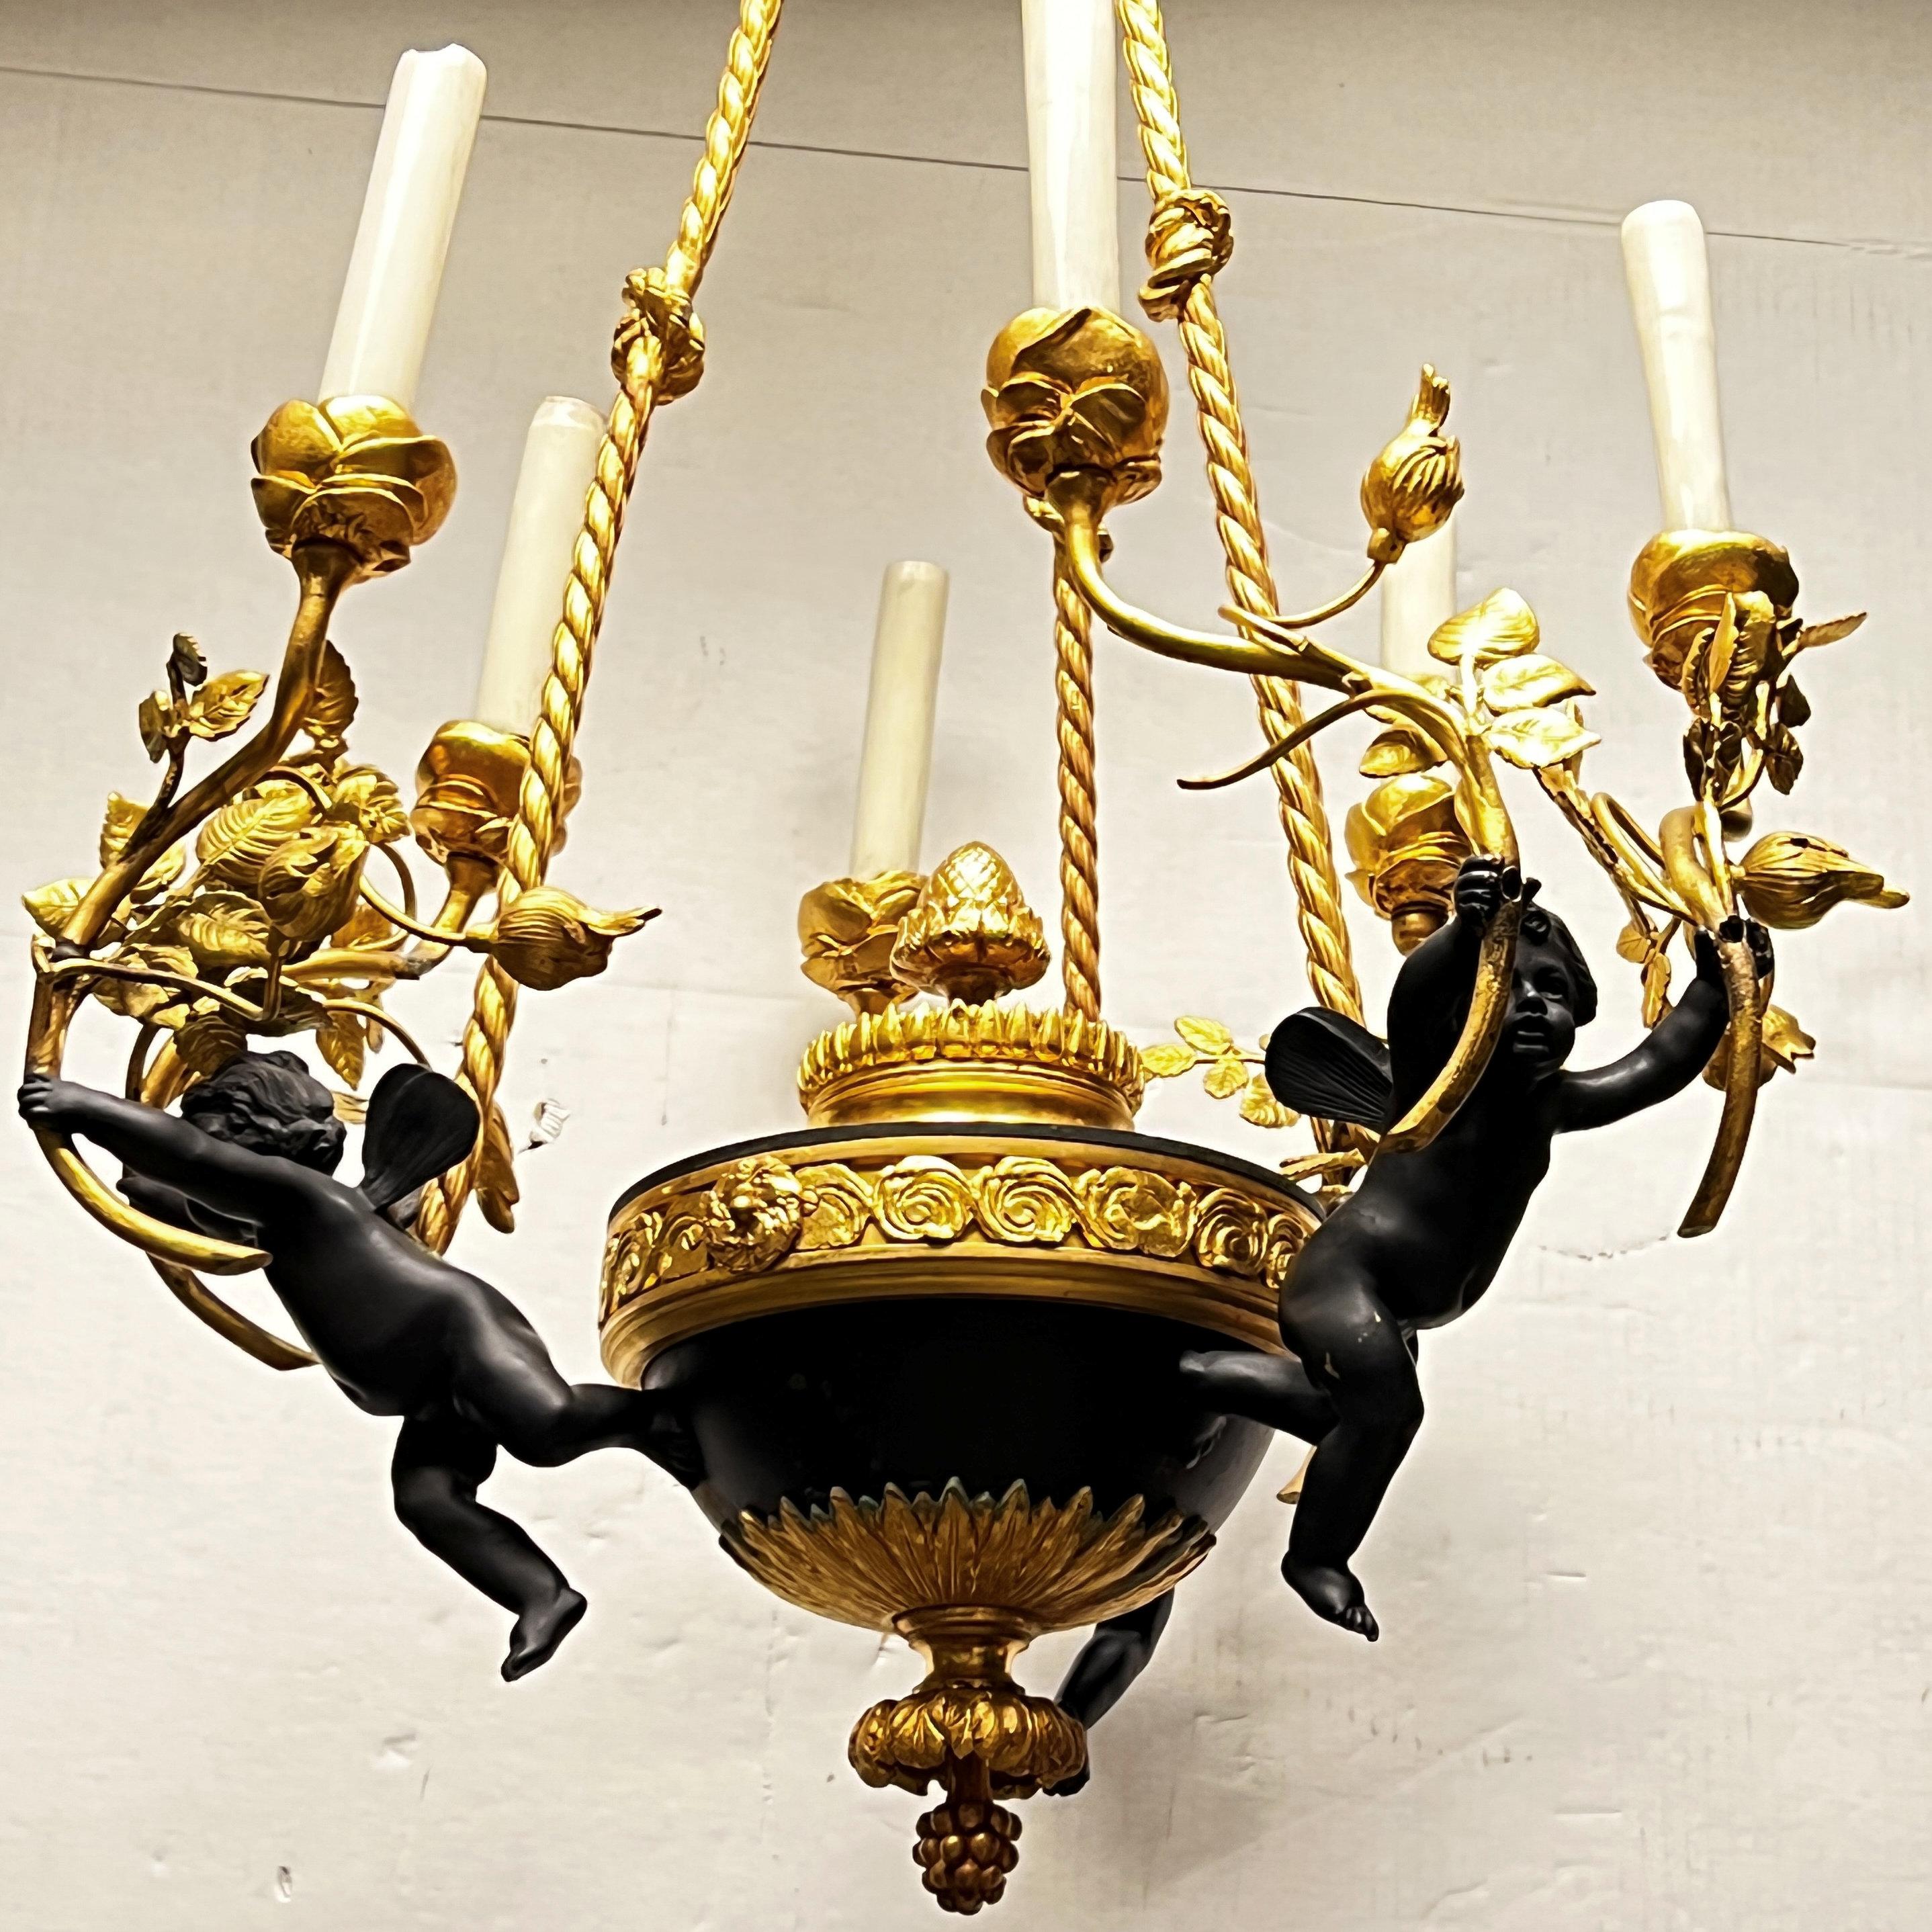 French Louis XVI Style Patinated Bronze Six-Light Putti Motif Chandelier For Sale 2